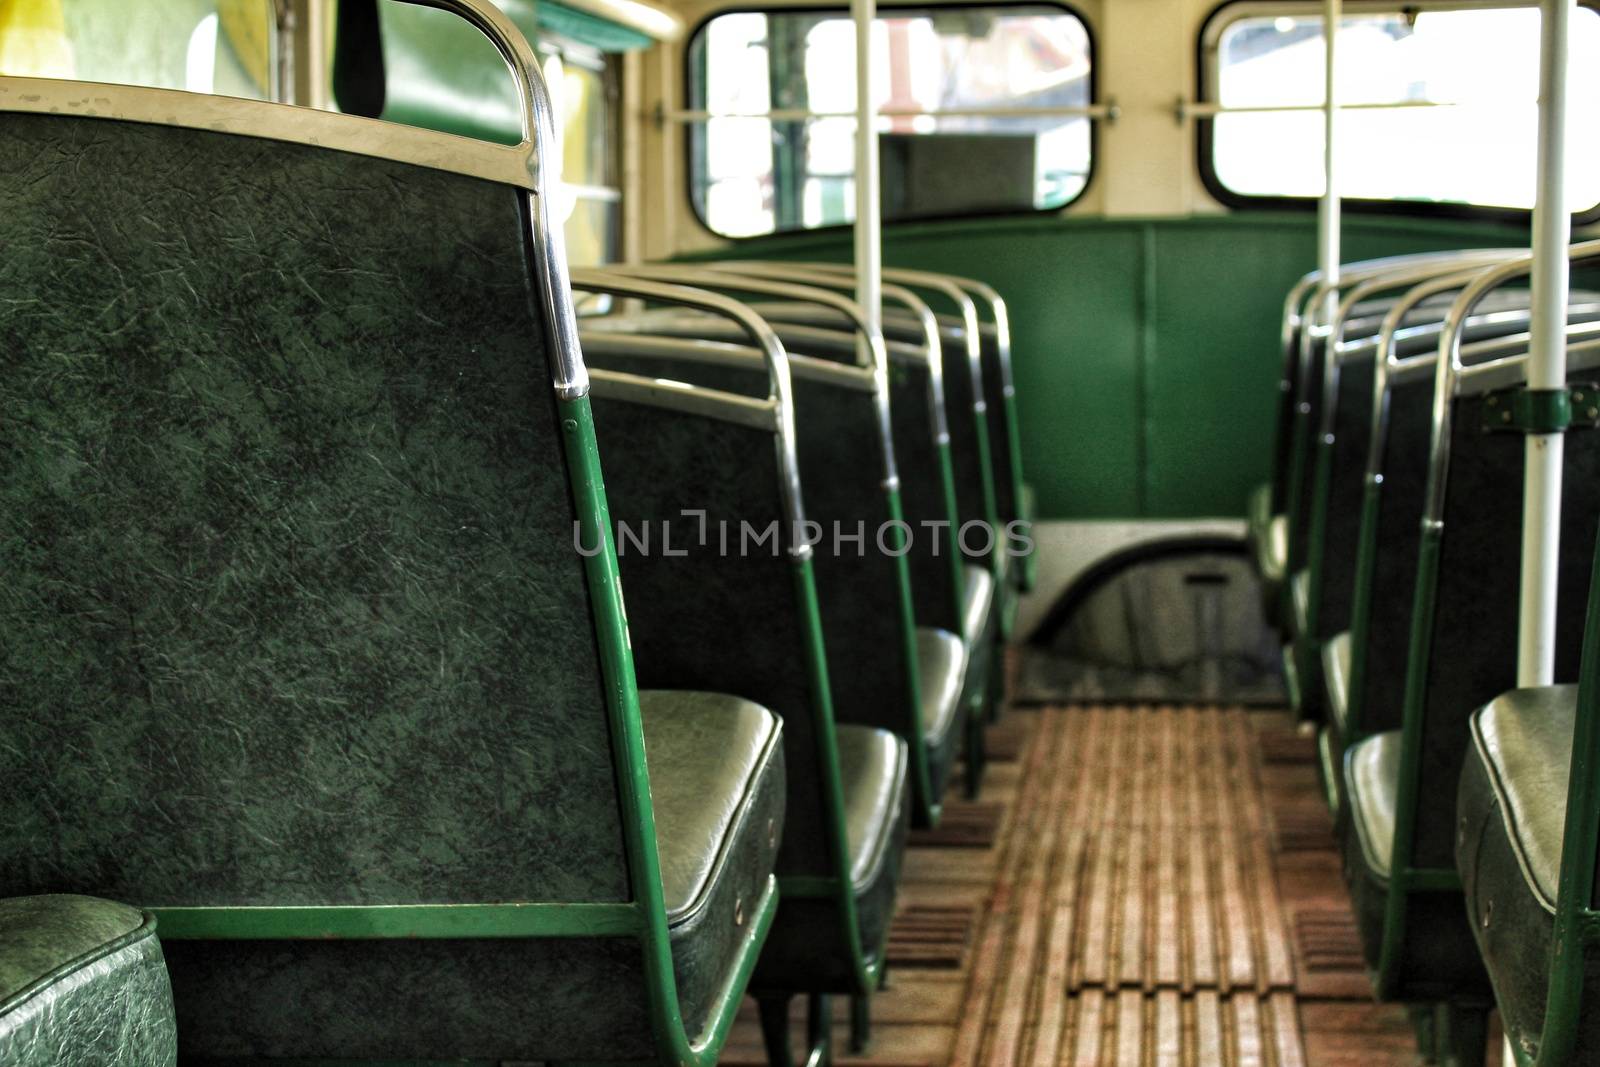 Lisbon, Portugal- June 15, 2018: Old and colorful inside passenger bus at an exhibition.